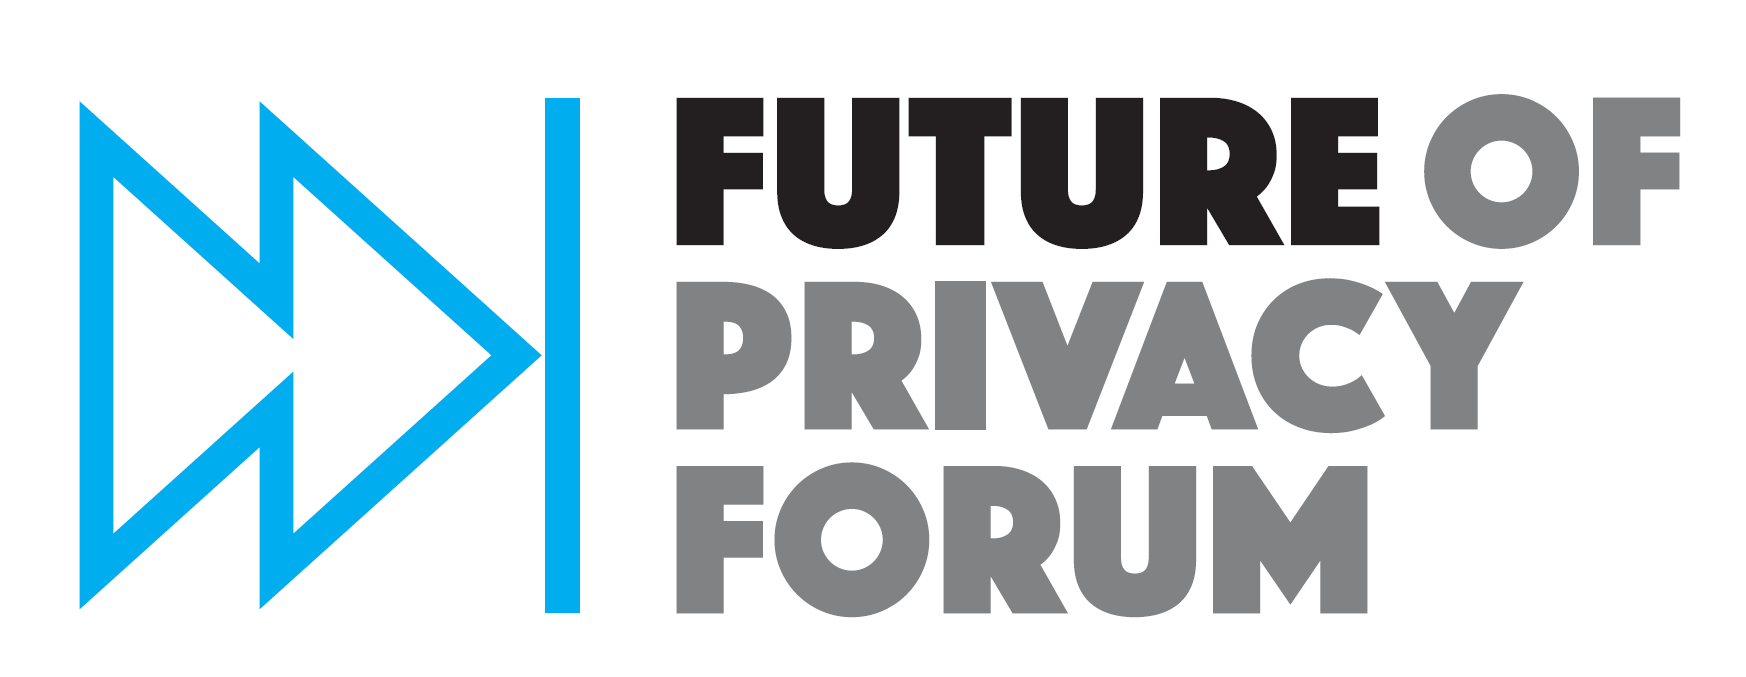 The Brussels Privacy Symposium: Presentations - Future of Privacy Forum